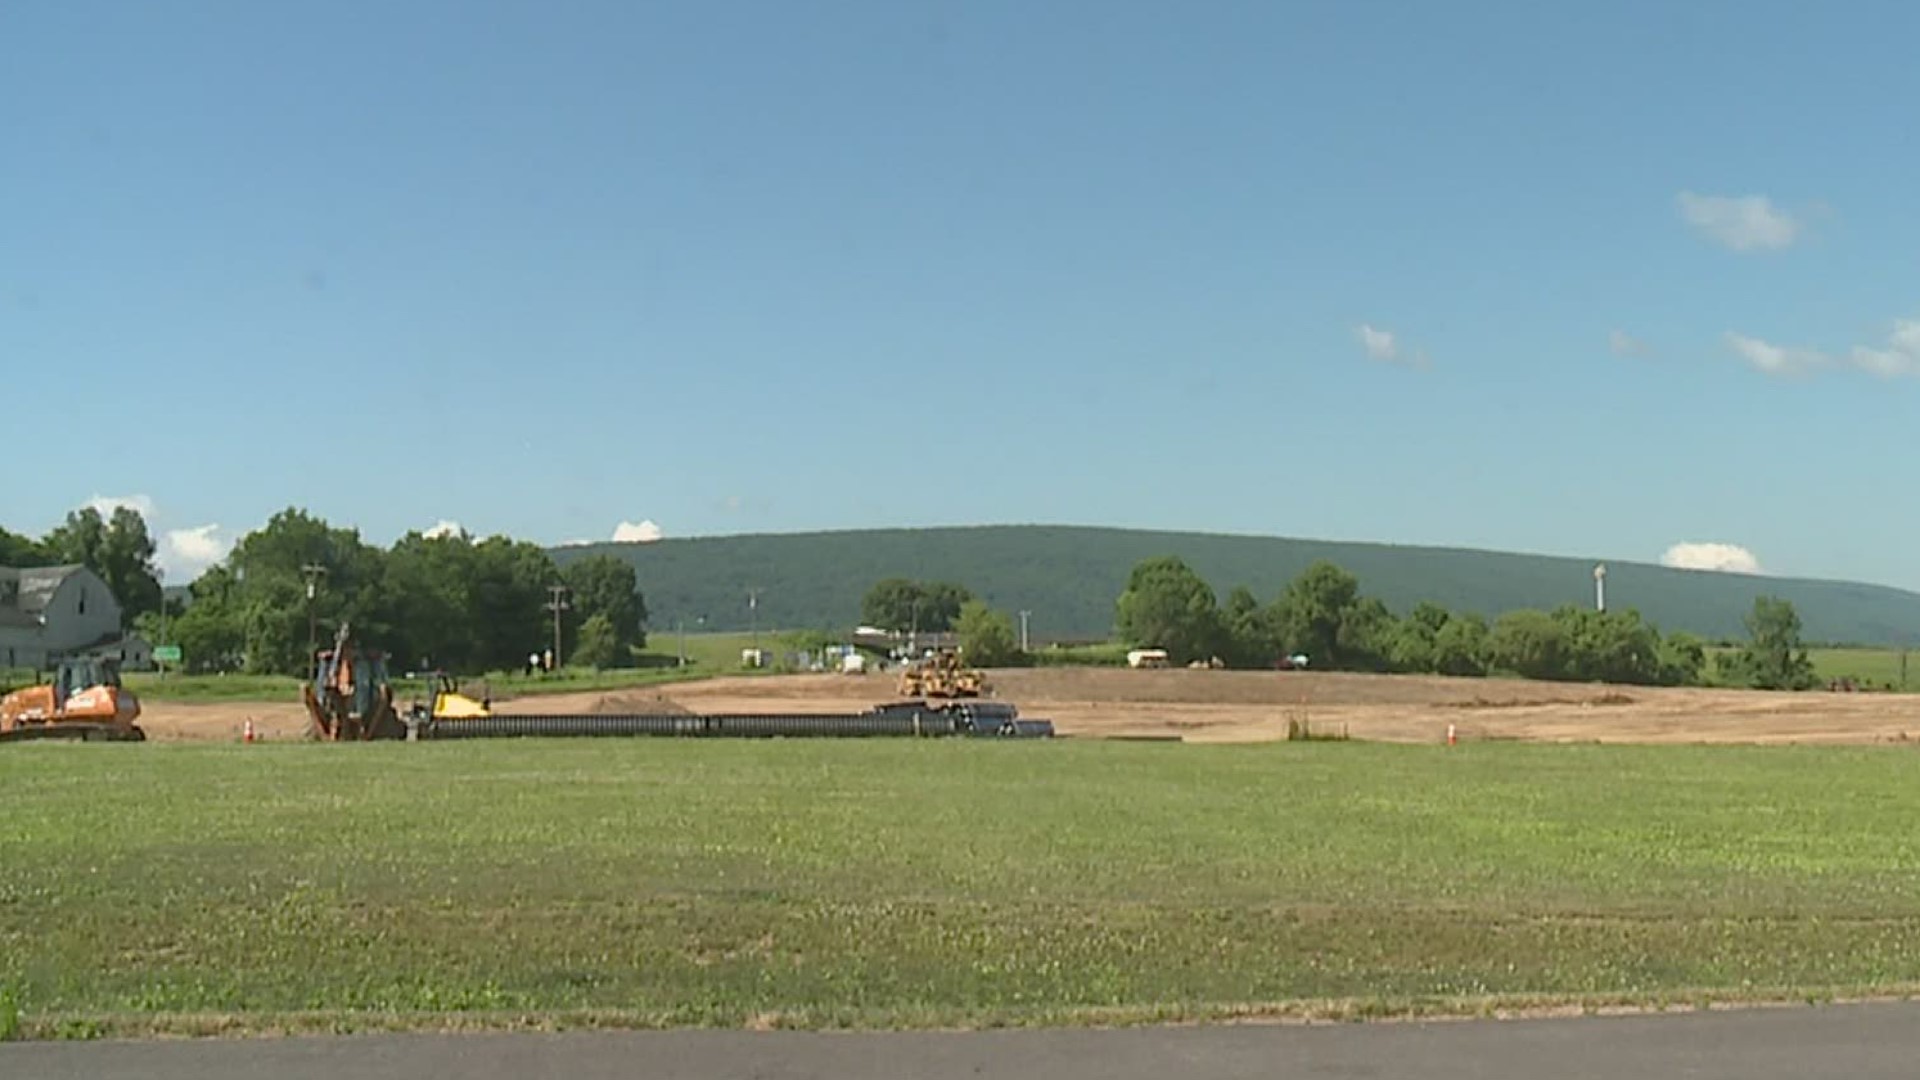 Land has been cleared off Route 220 for the future Geisinger Medical Center Muncy.